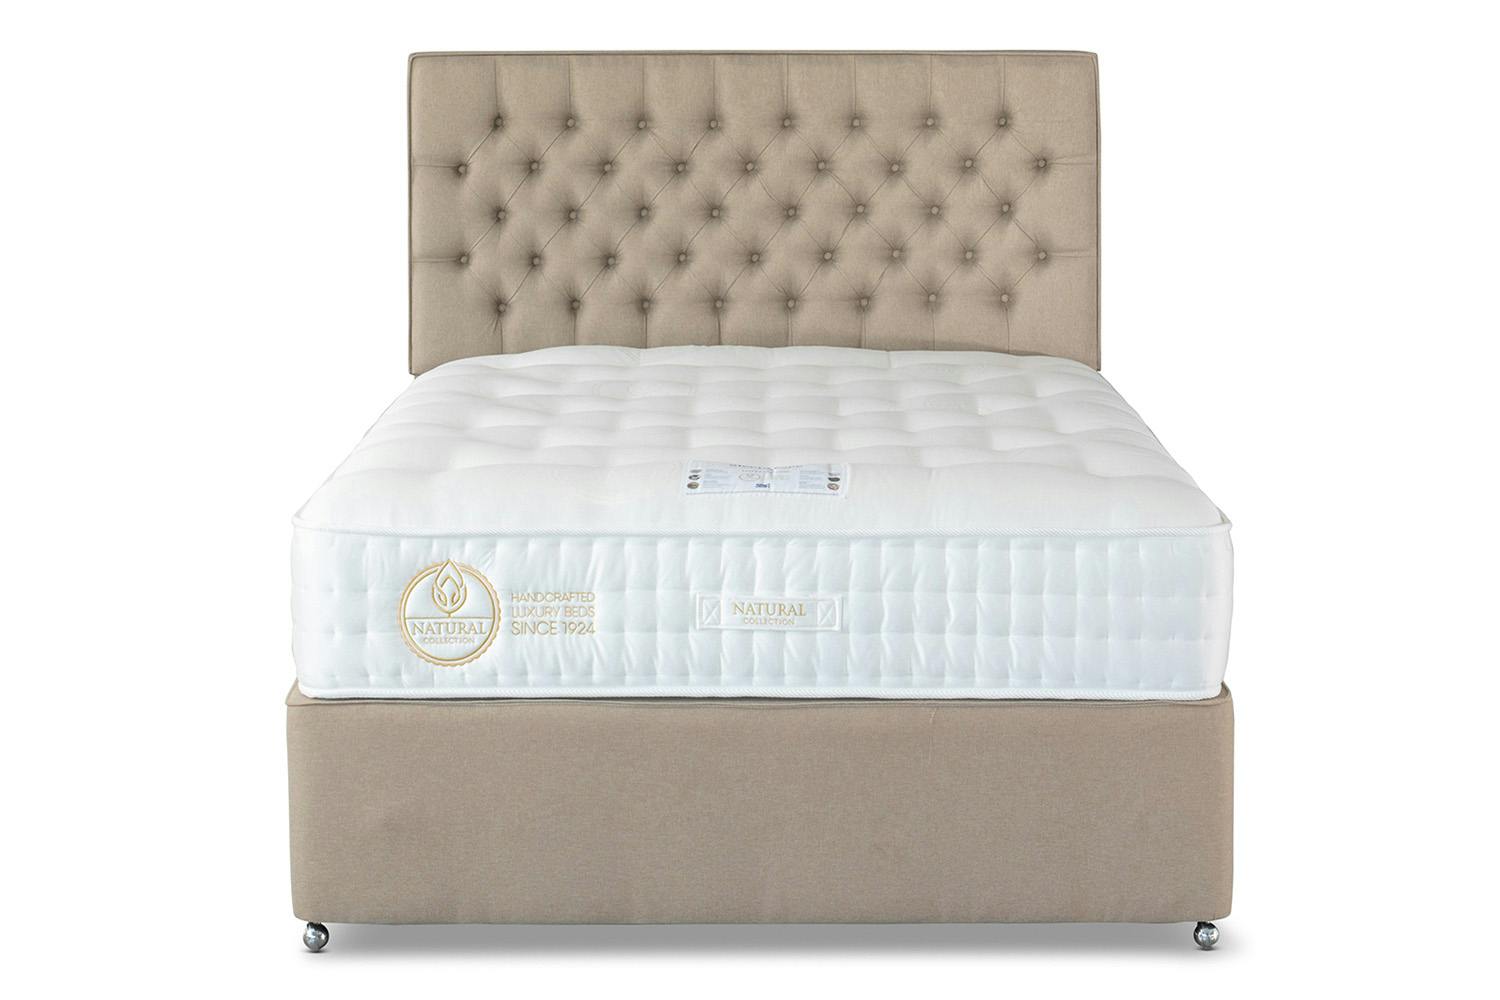 imperial size cot mattress